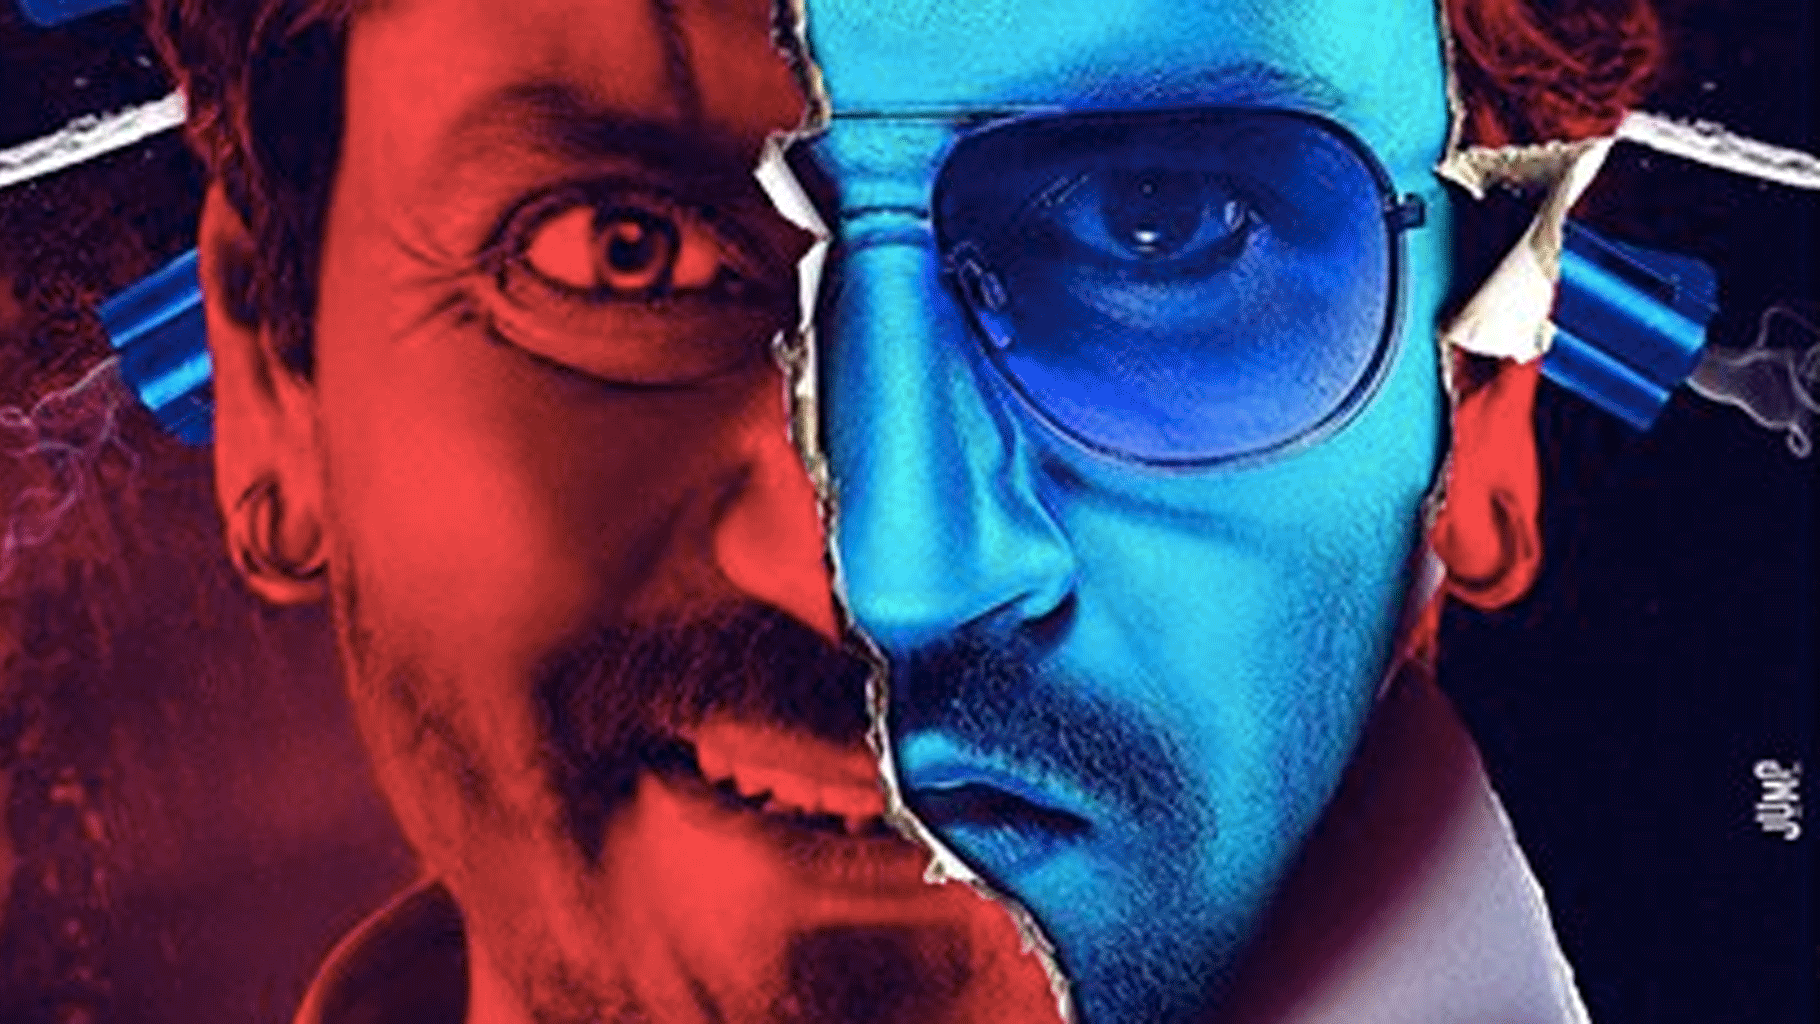 <i>

Raman Raghav 2.0</i> is a grisly account of a psychopath’s search for a “soulmate”. (Photo: Official Poster of <i>Raman Raghav 2.0</i>)